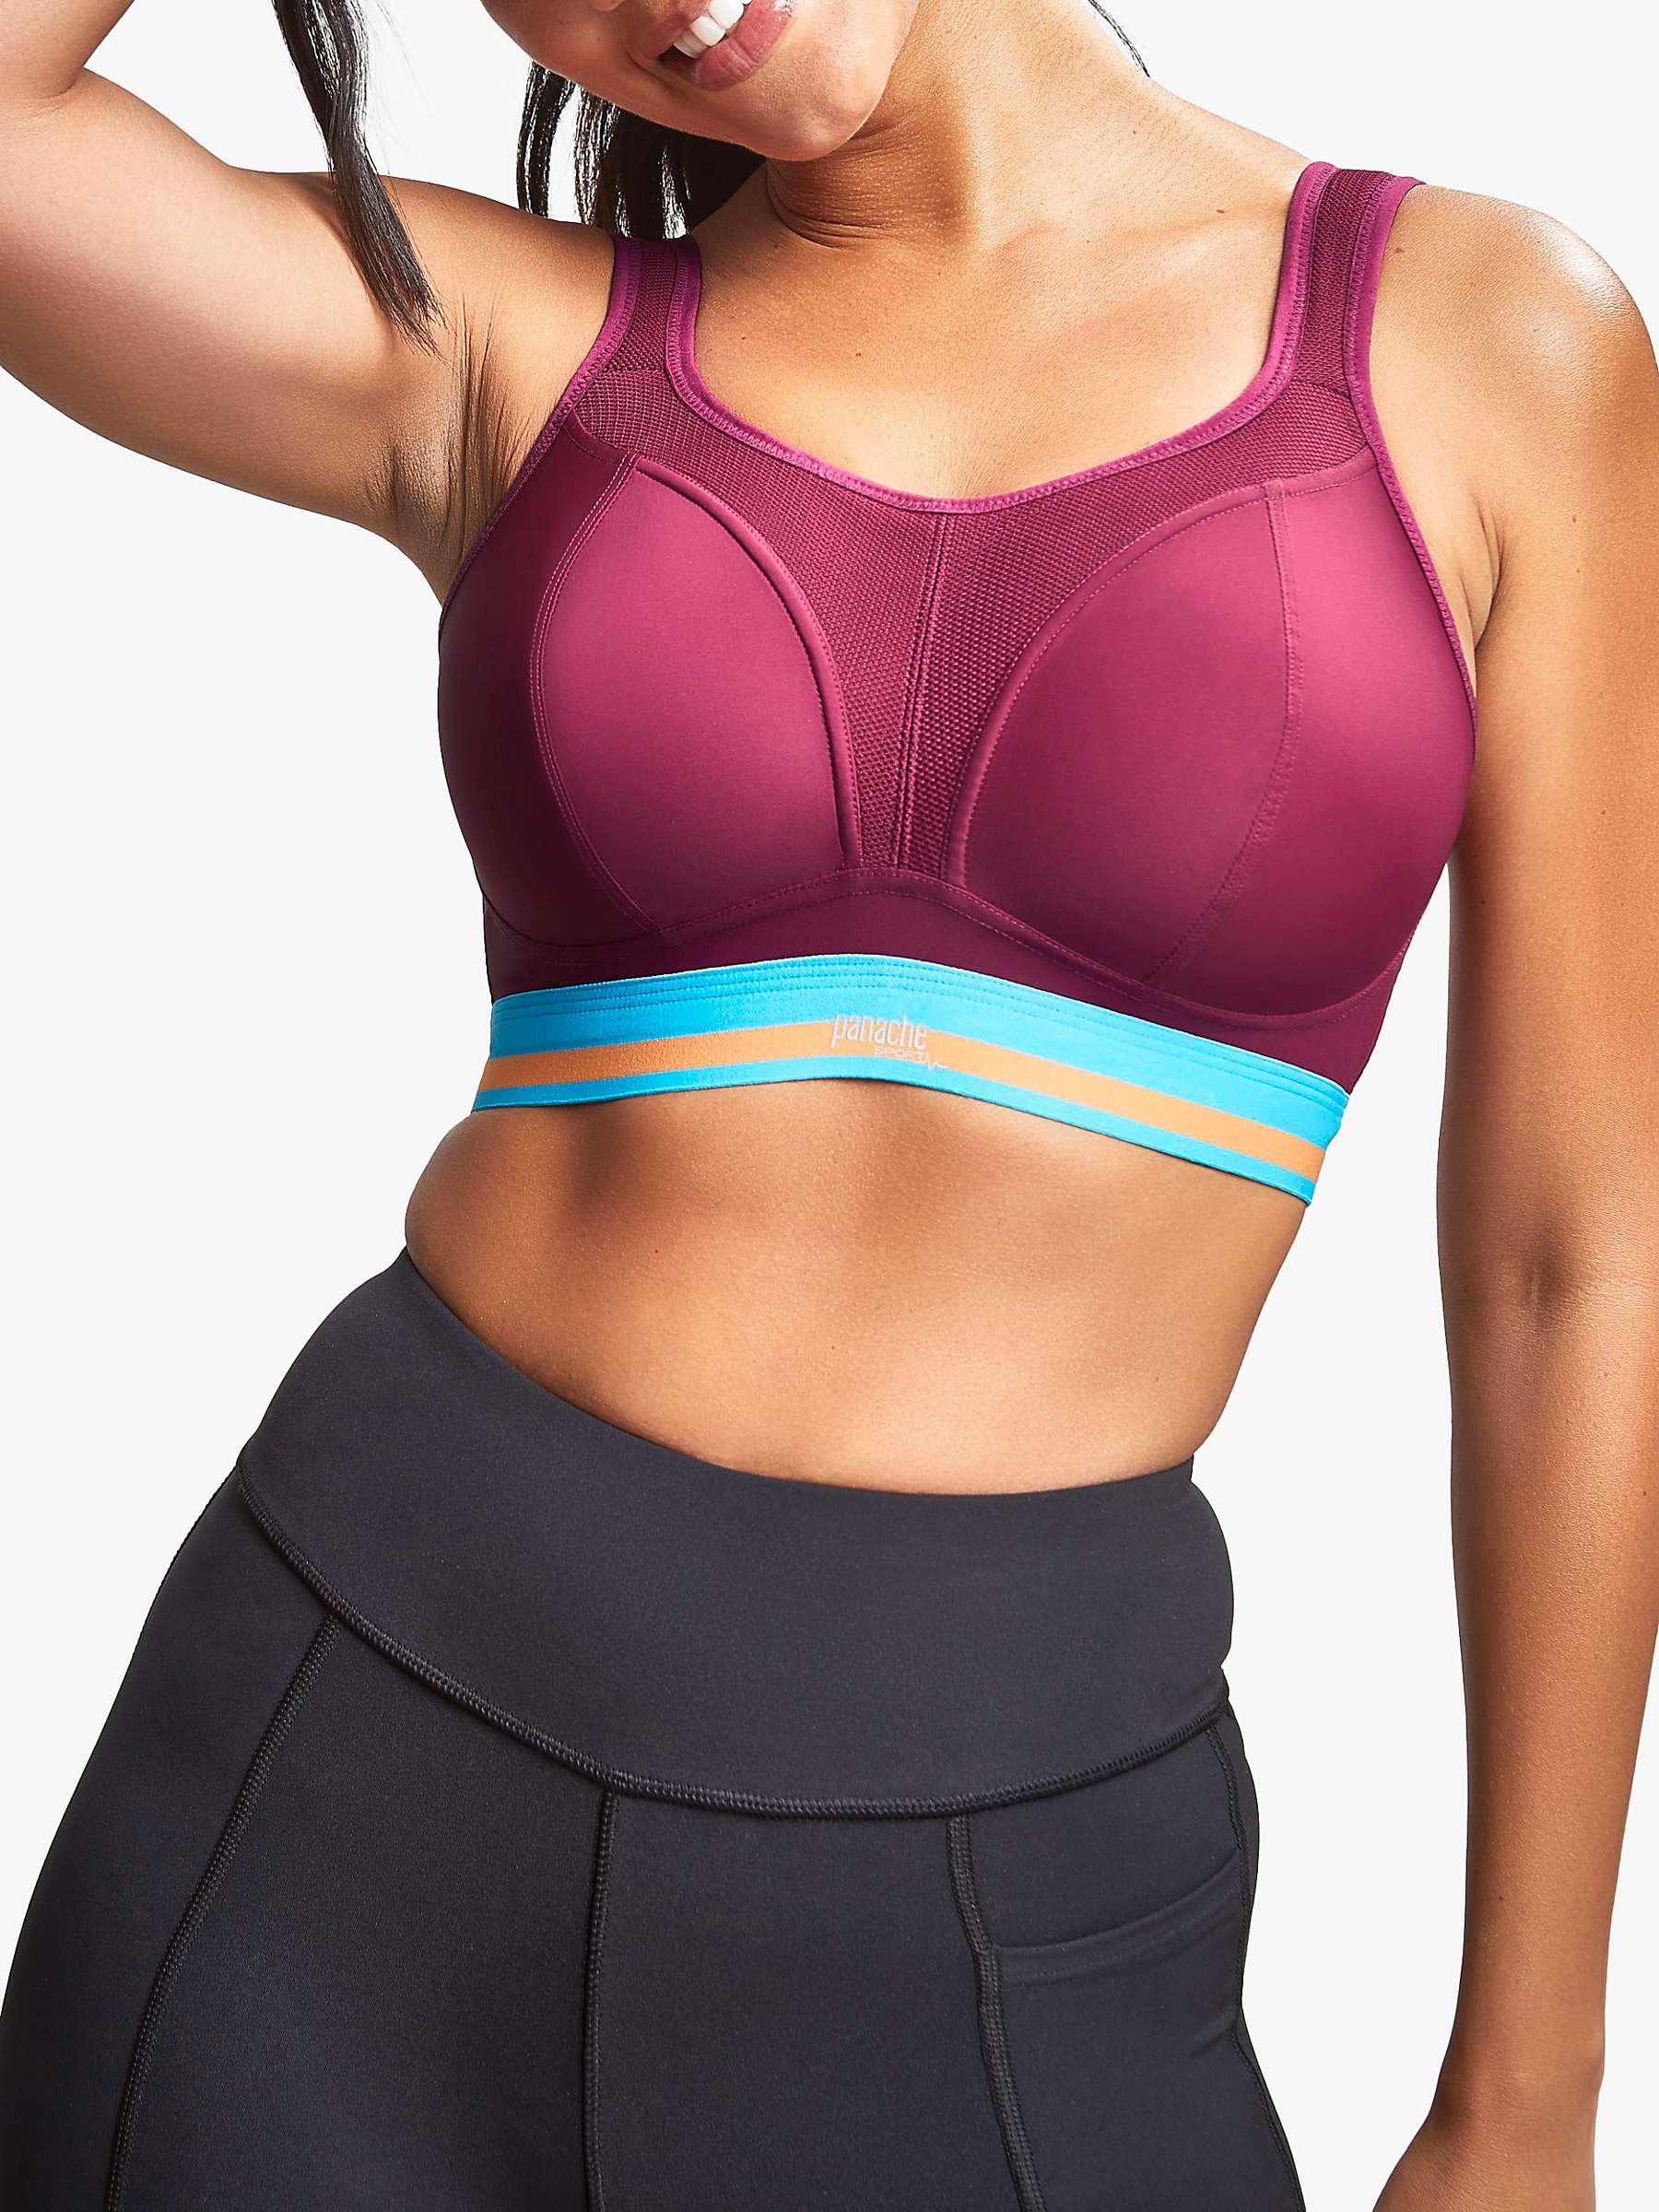 Buy Panache Non Wired Sports Bra, Cranberry Online at johnlewis.com